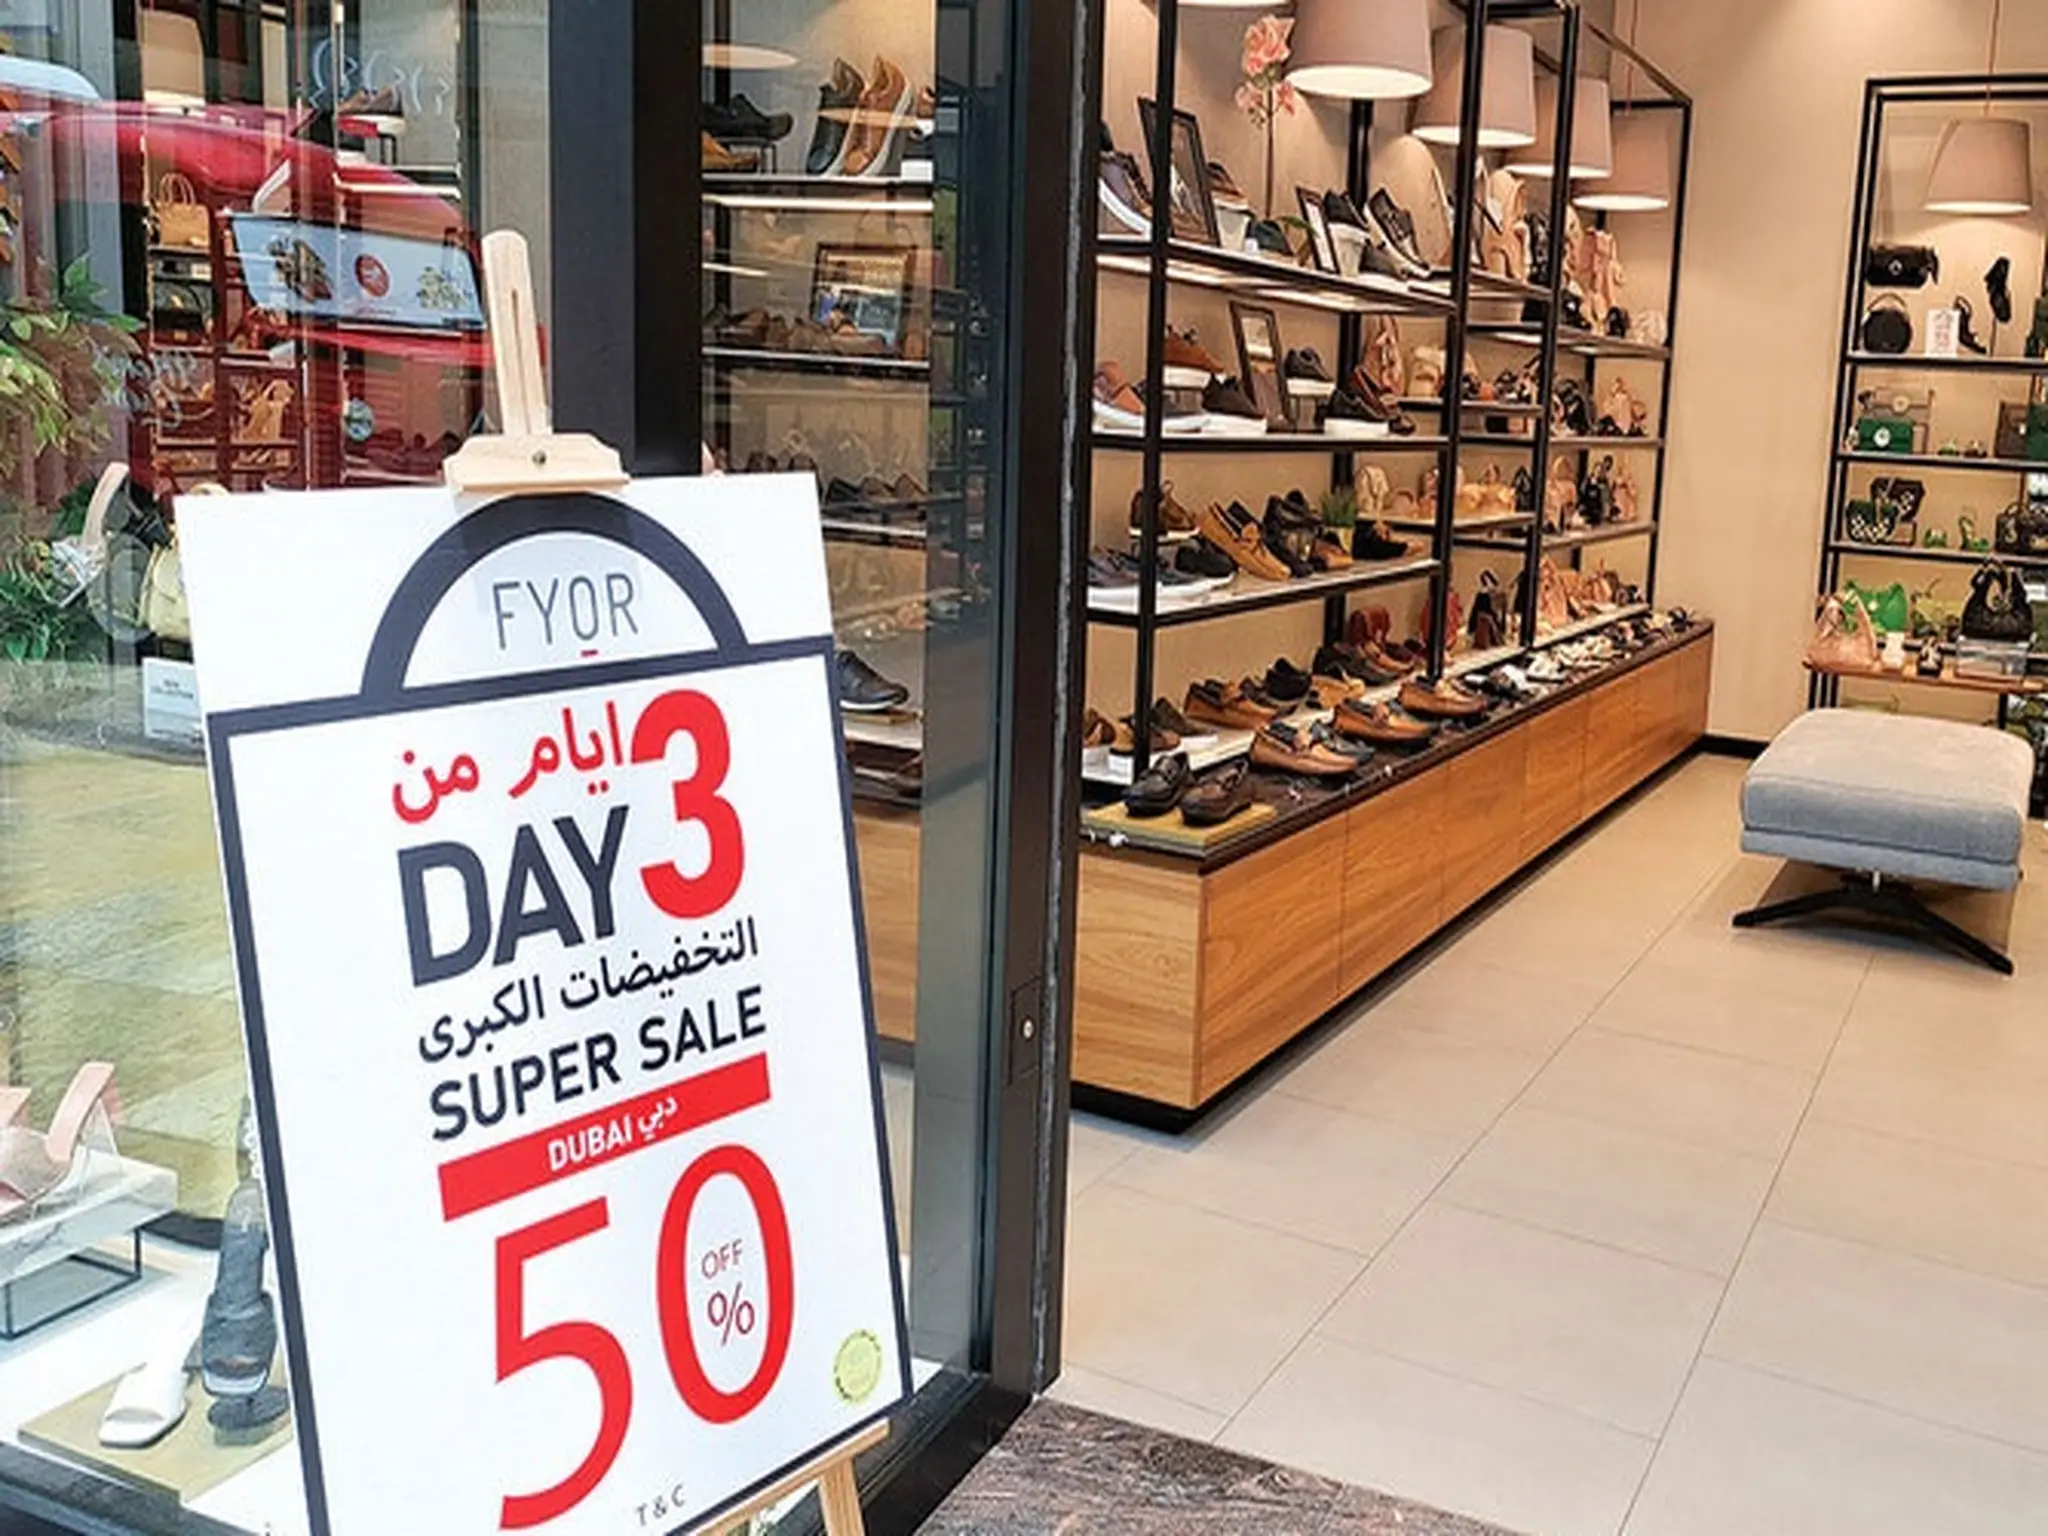 Shopping malls in Dubai are witnessing a high turnout with the launch of "big discounts"